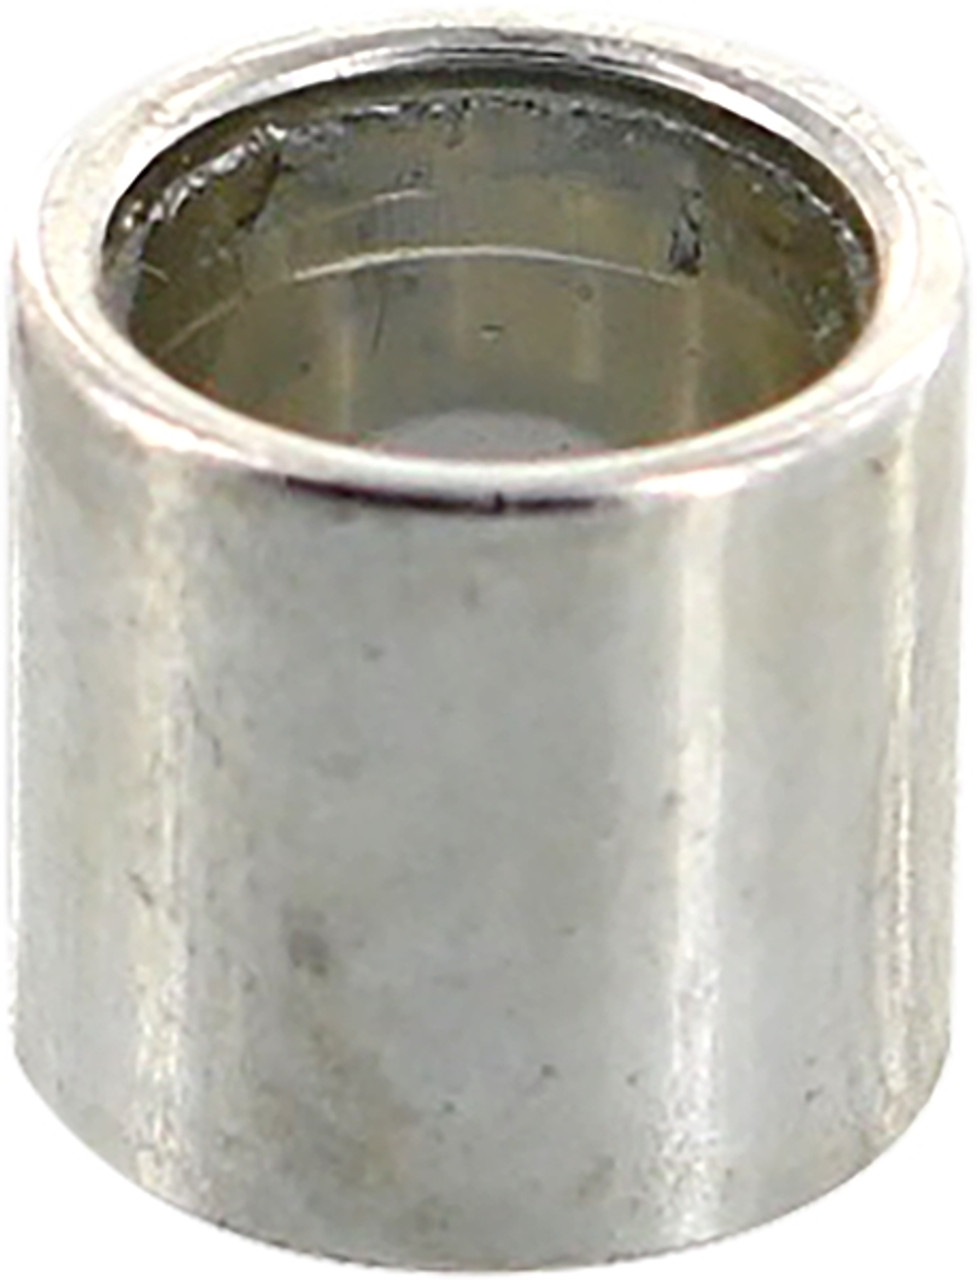 SHORTY'S BEARING SPACER (1pc)